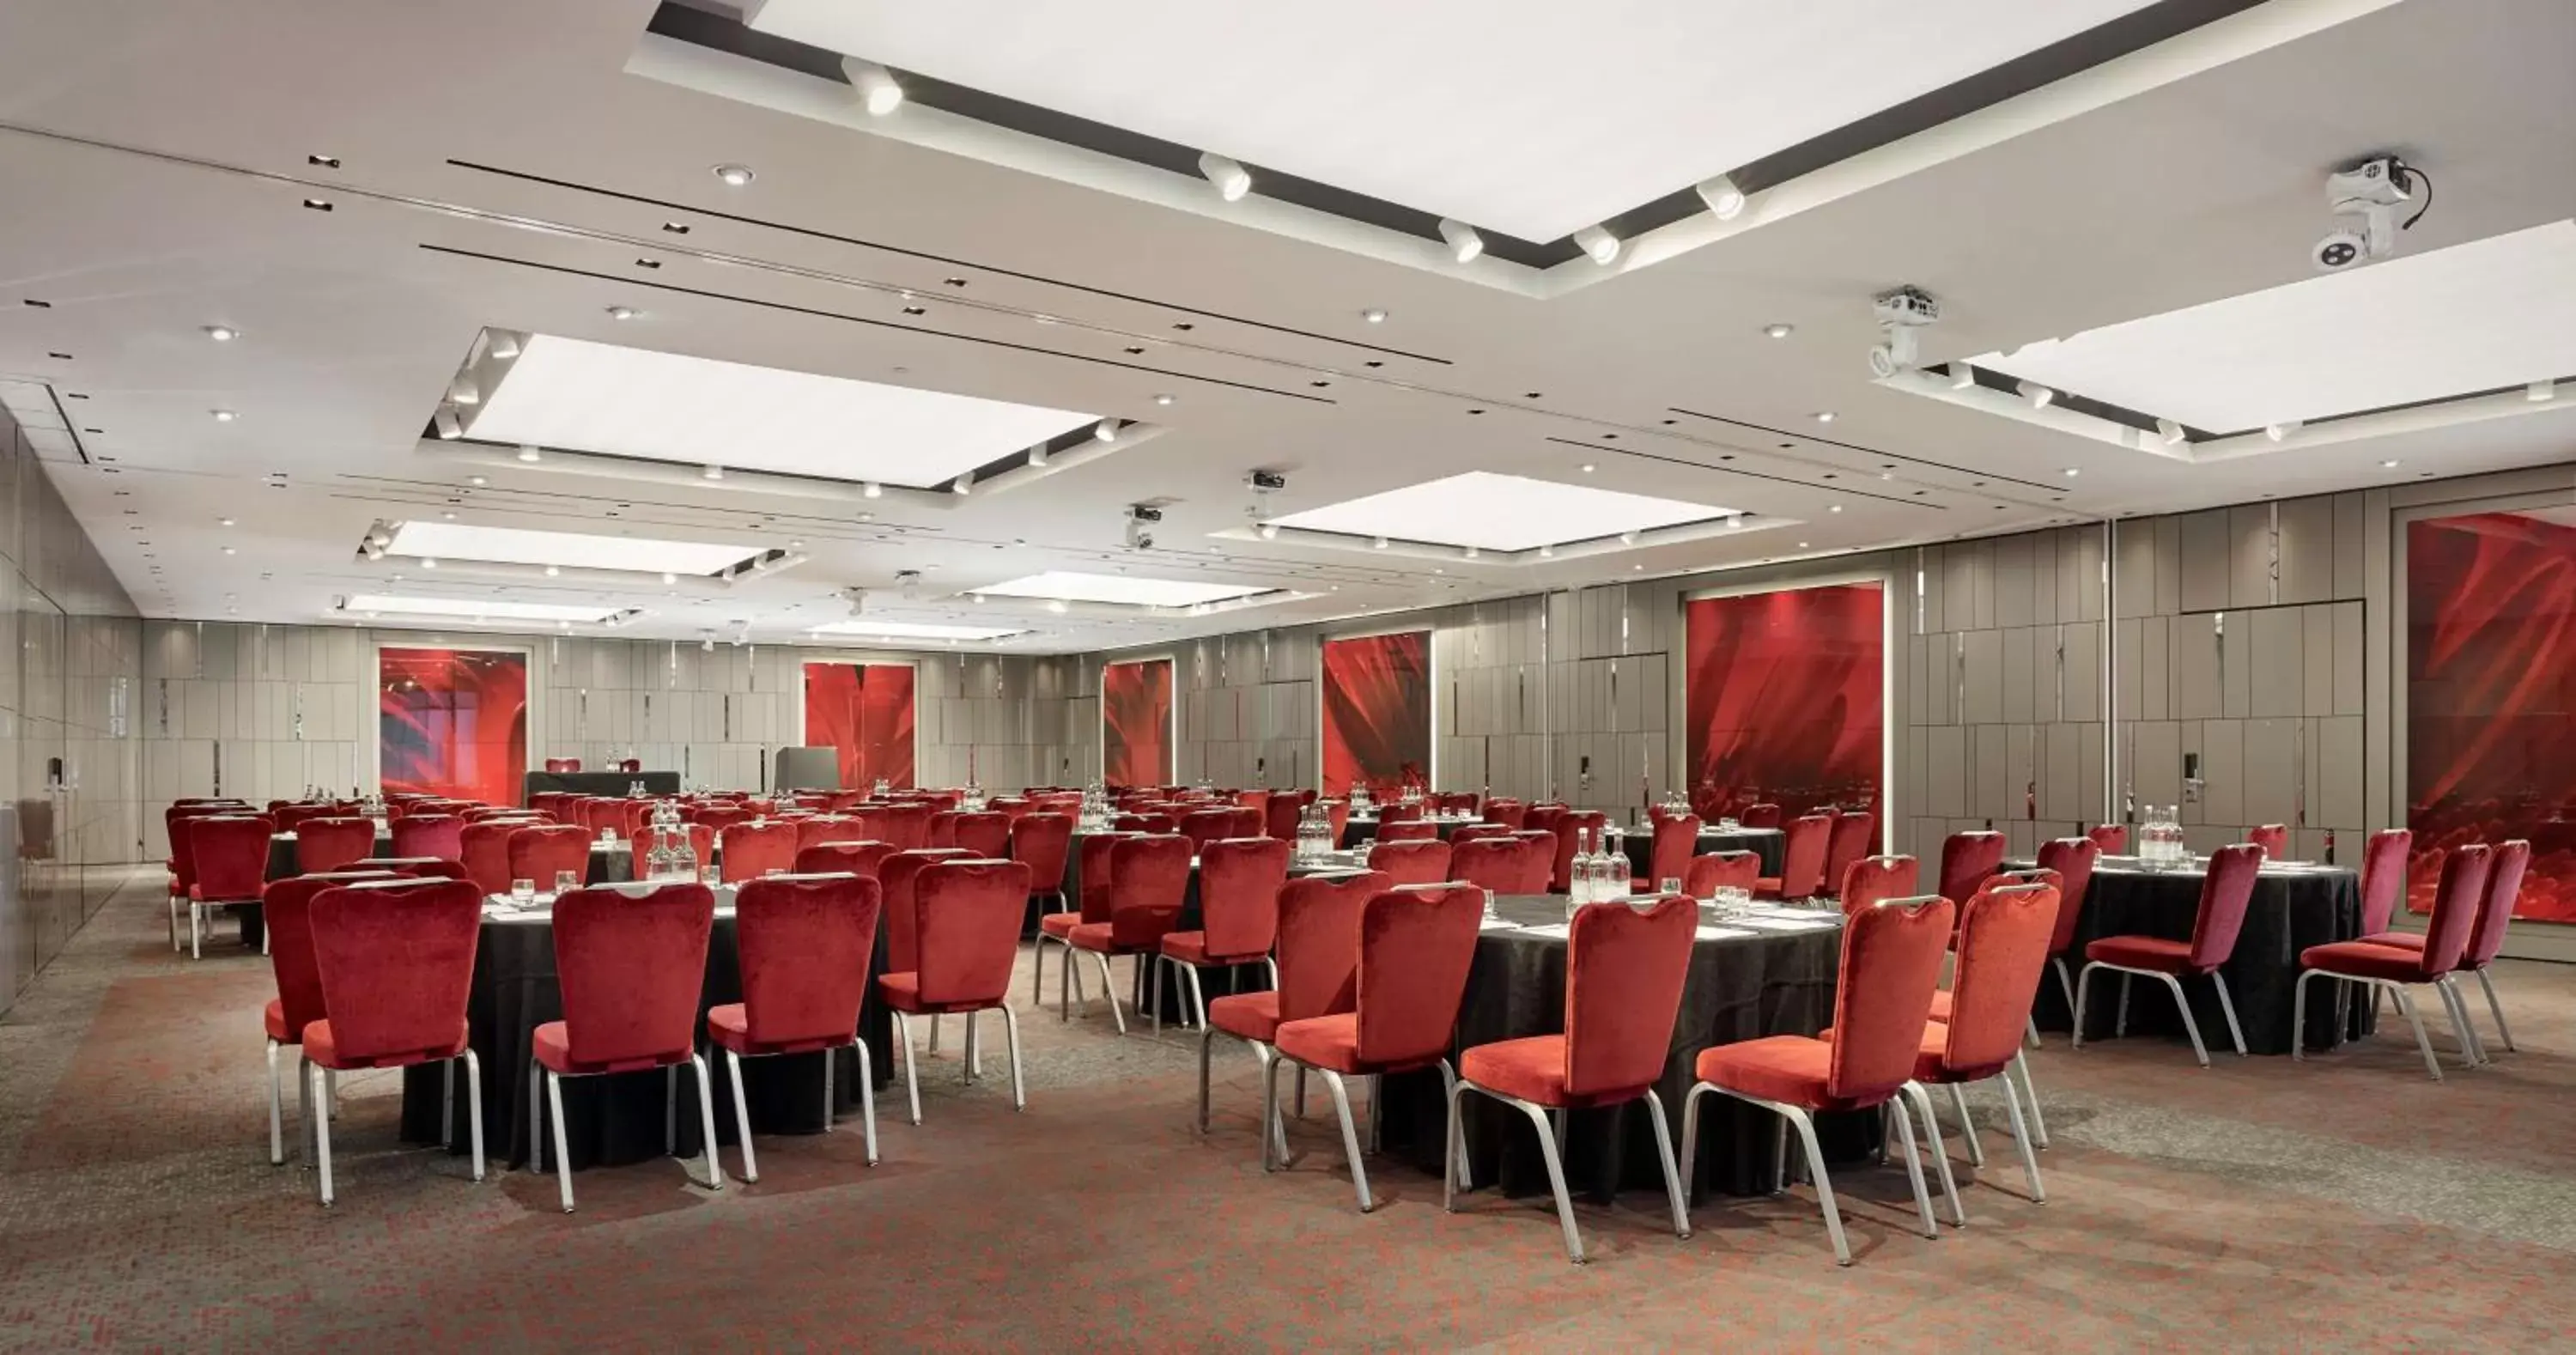 On site, Banquet Facilities in Park Plaza London Riverbank